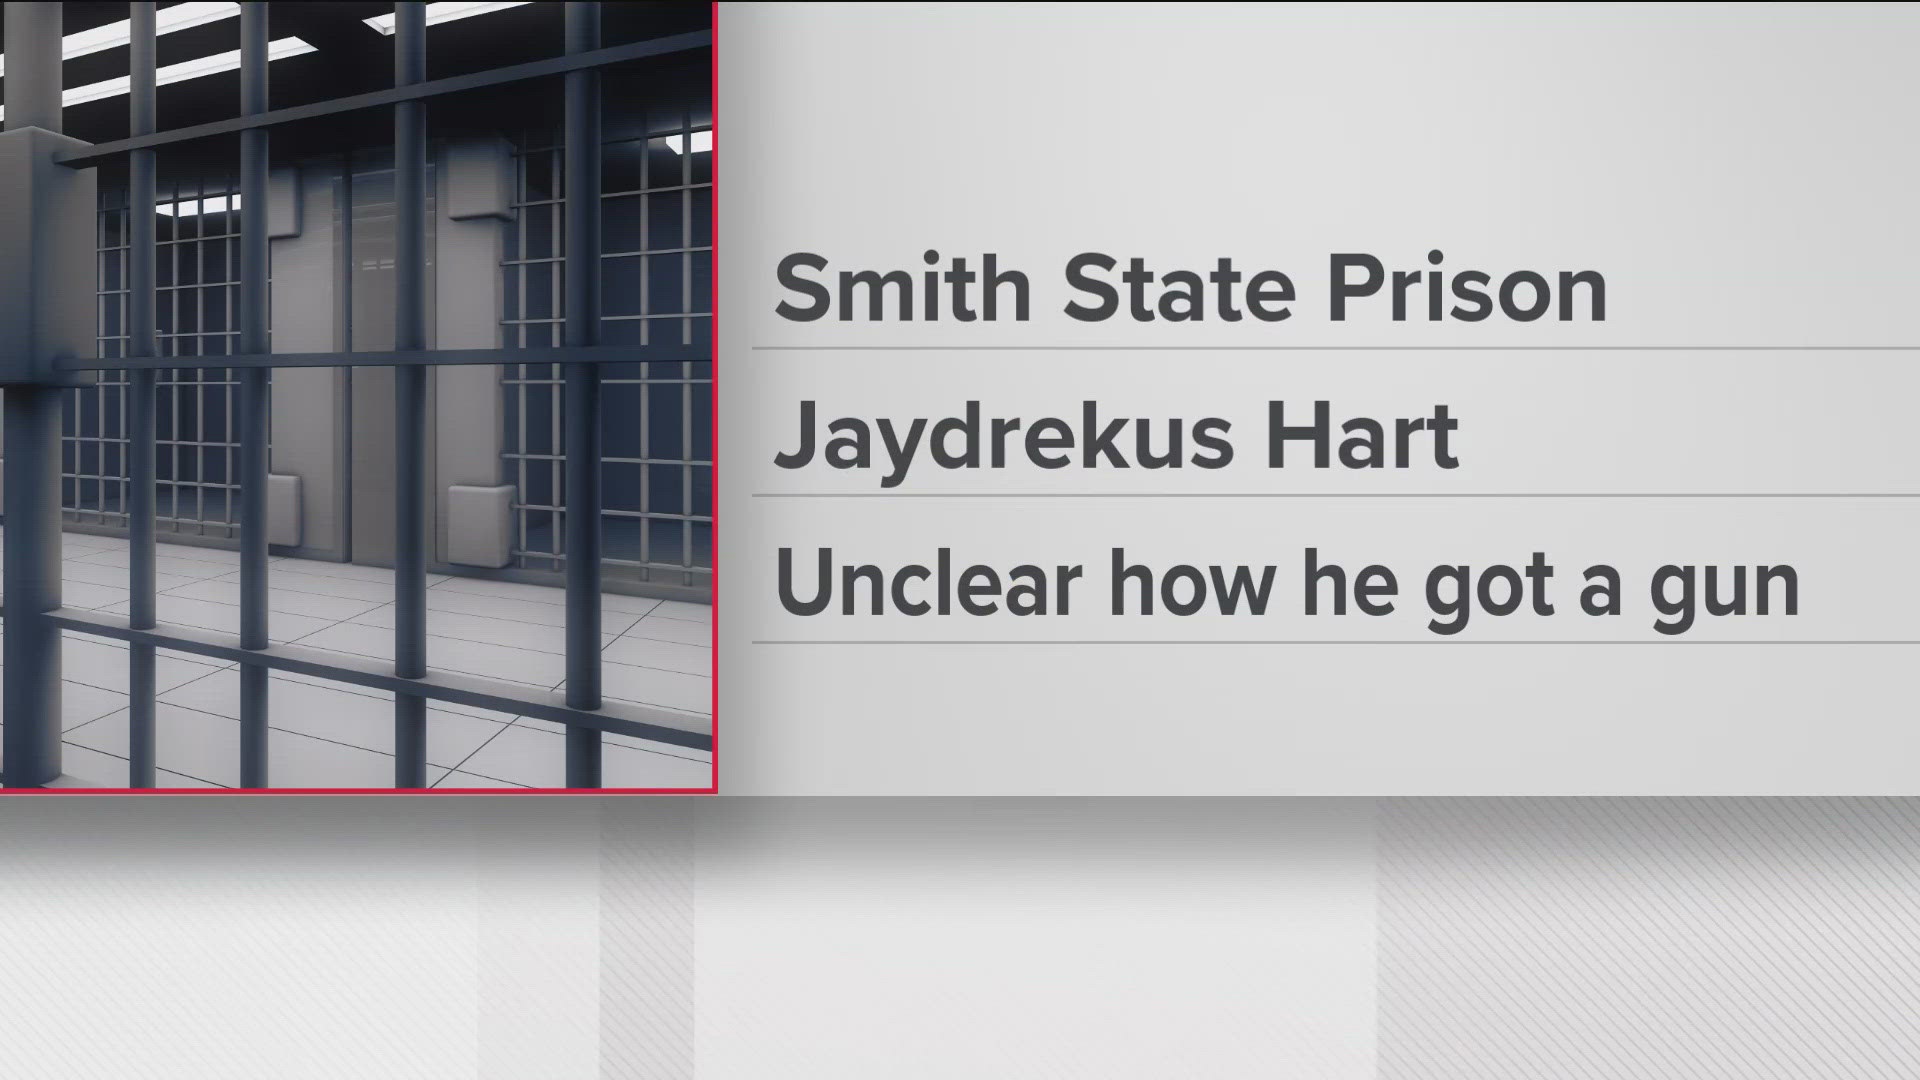 Officials said the employee was working in the prison's kitchen and was shot by an inmate who had a gun.